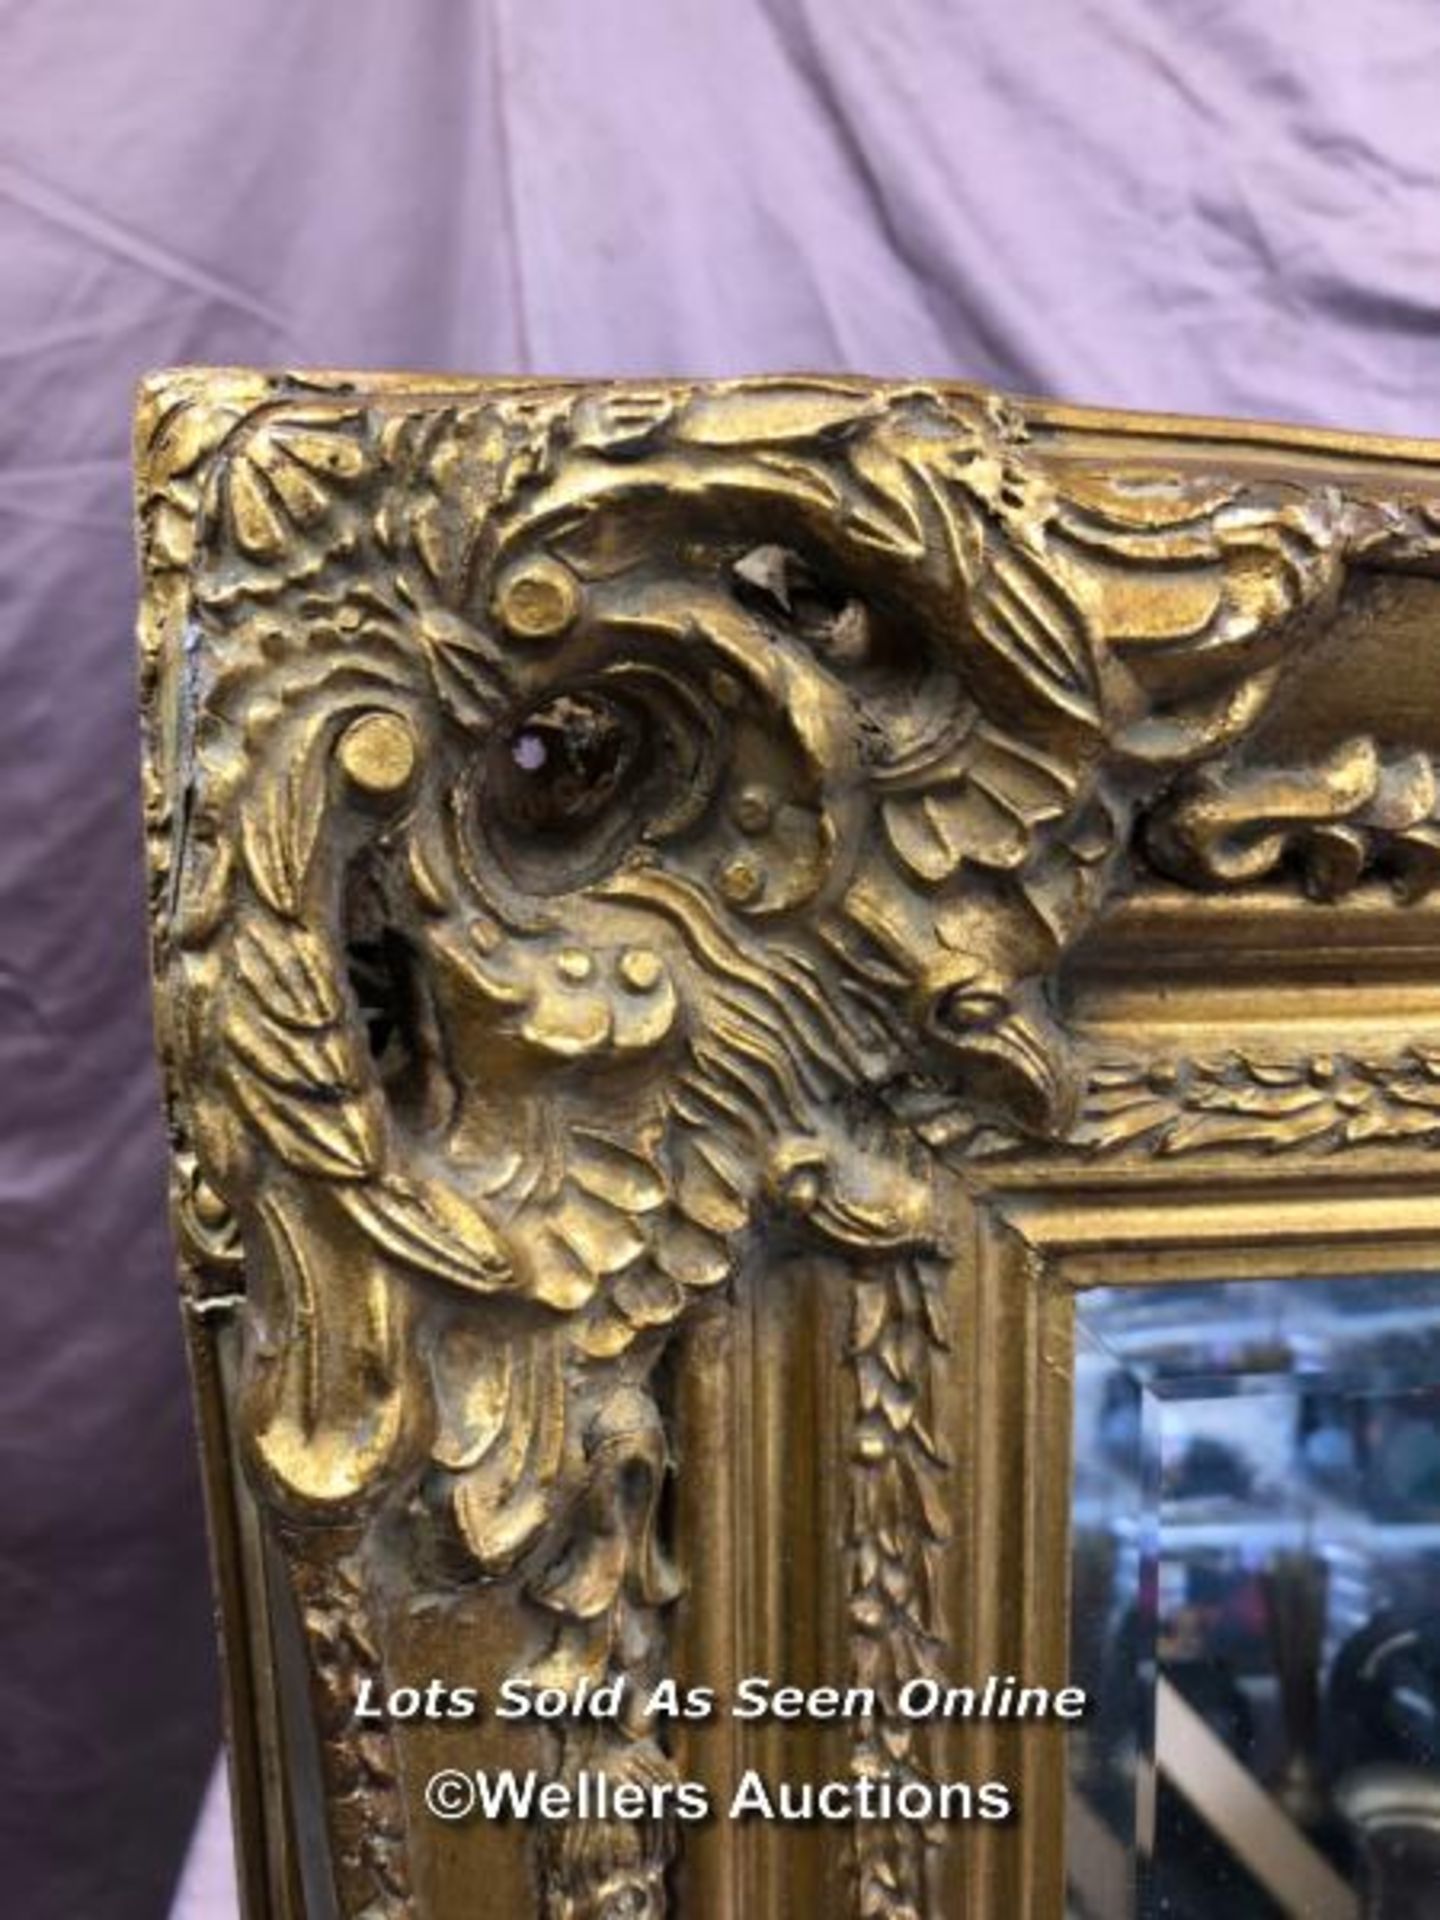 LARGE BEVELLED EDGE ANTIQUE STYLE MIRROR WITH DECORATIVE GILT FRAME, 114 X 147CM - Image 2 of 4